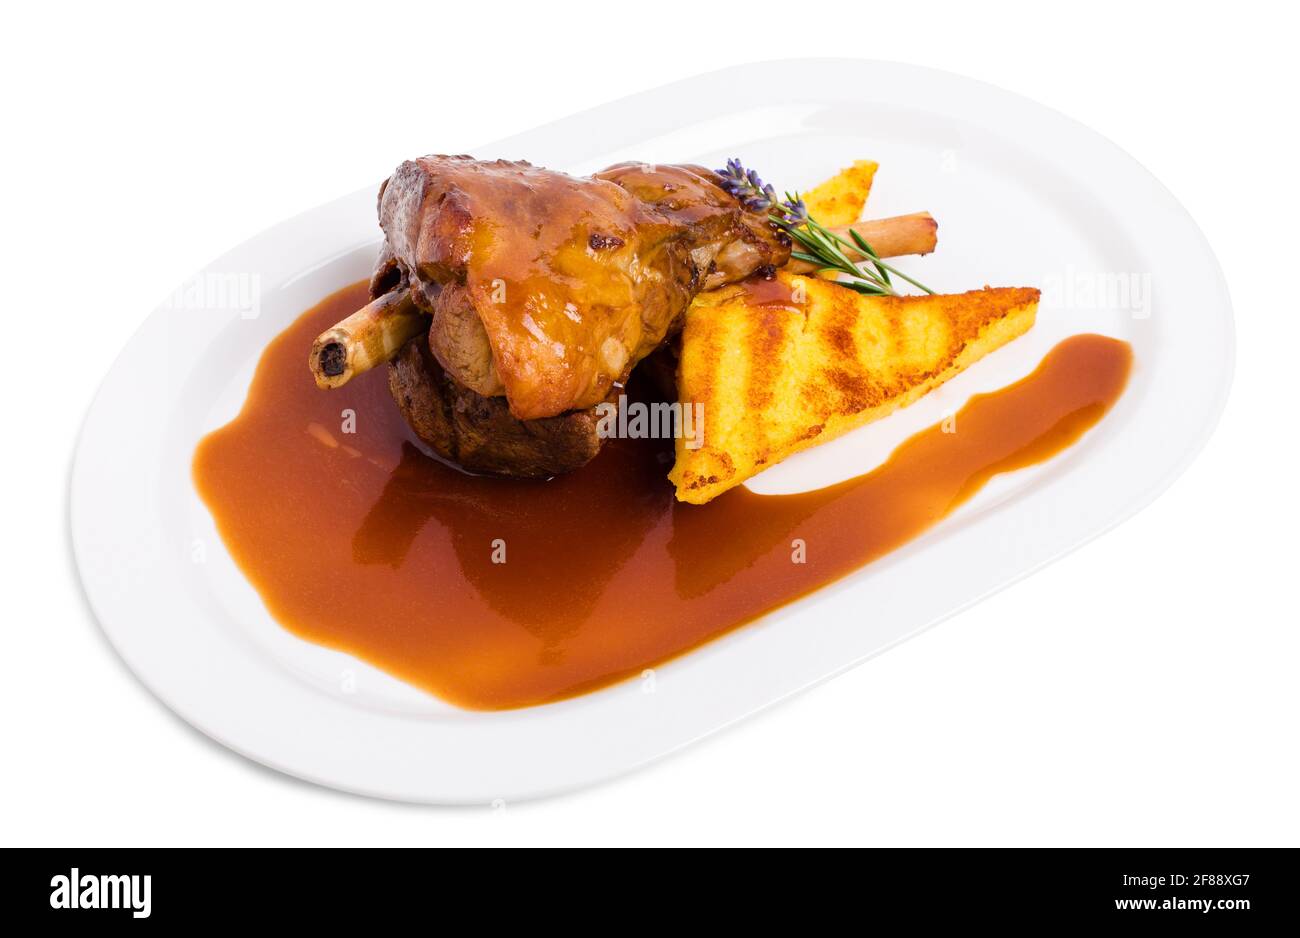 Fried lamb shank with polenta and covered with red sauce. Isolated on a white background. Stock Photo